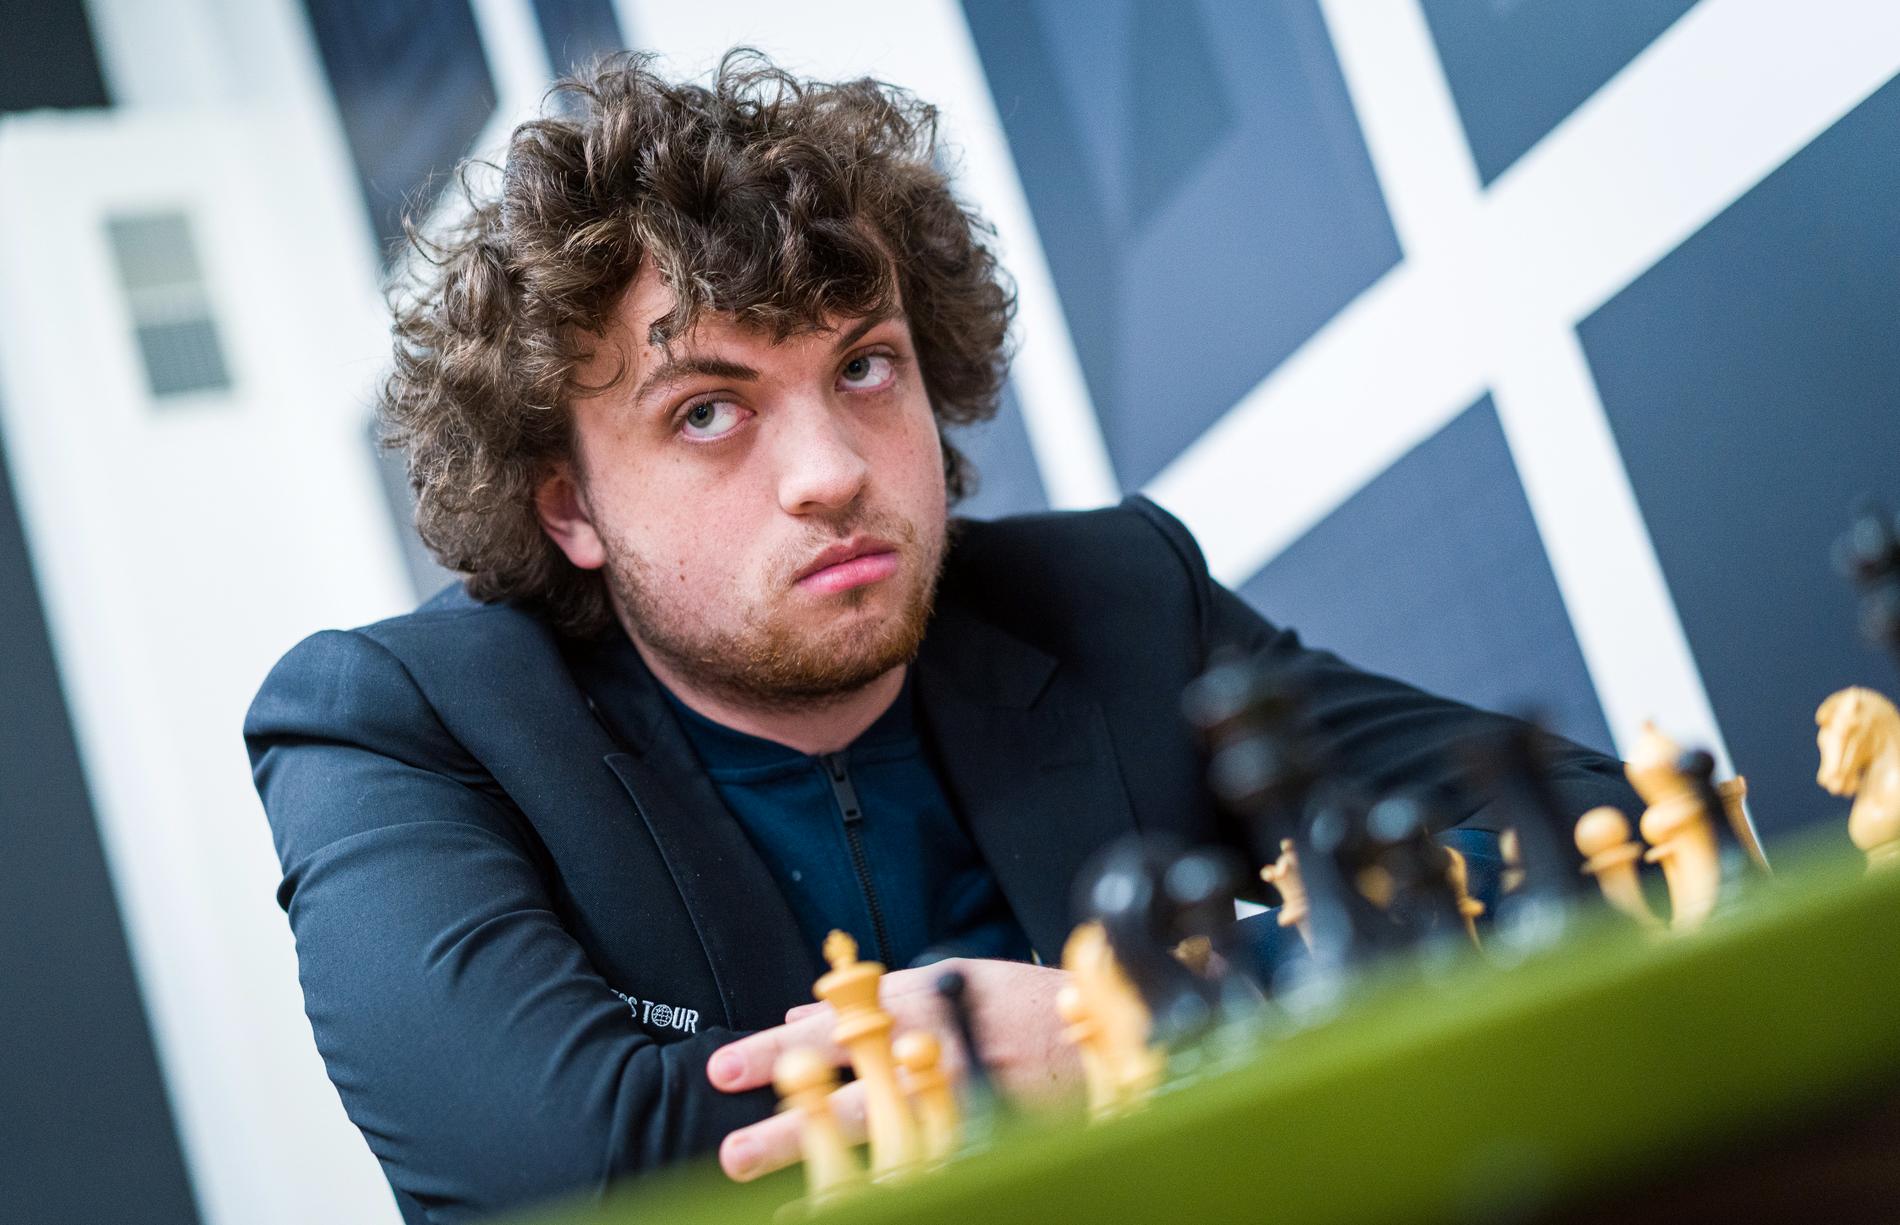 Niemann probably cheated in over 100 chess games - VG